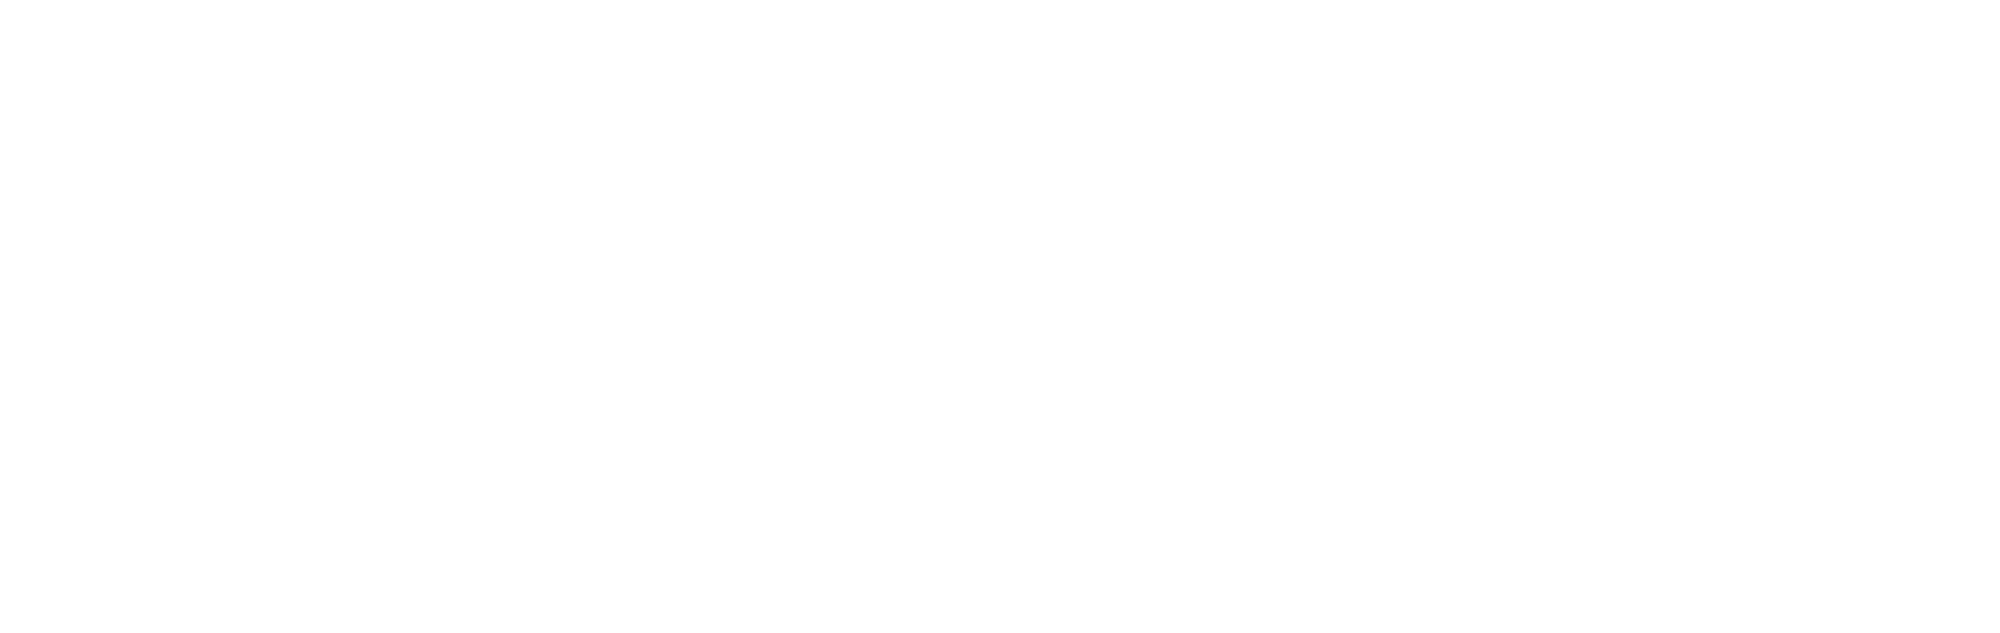 Next Generation Technical Solutions